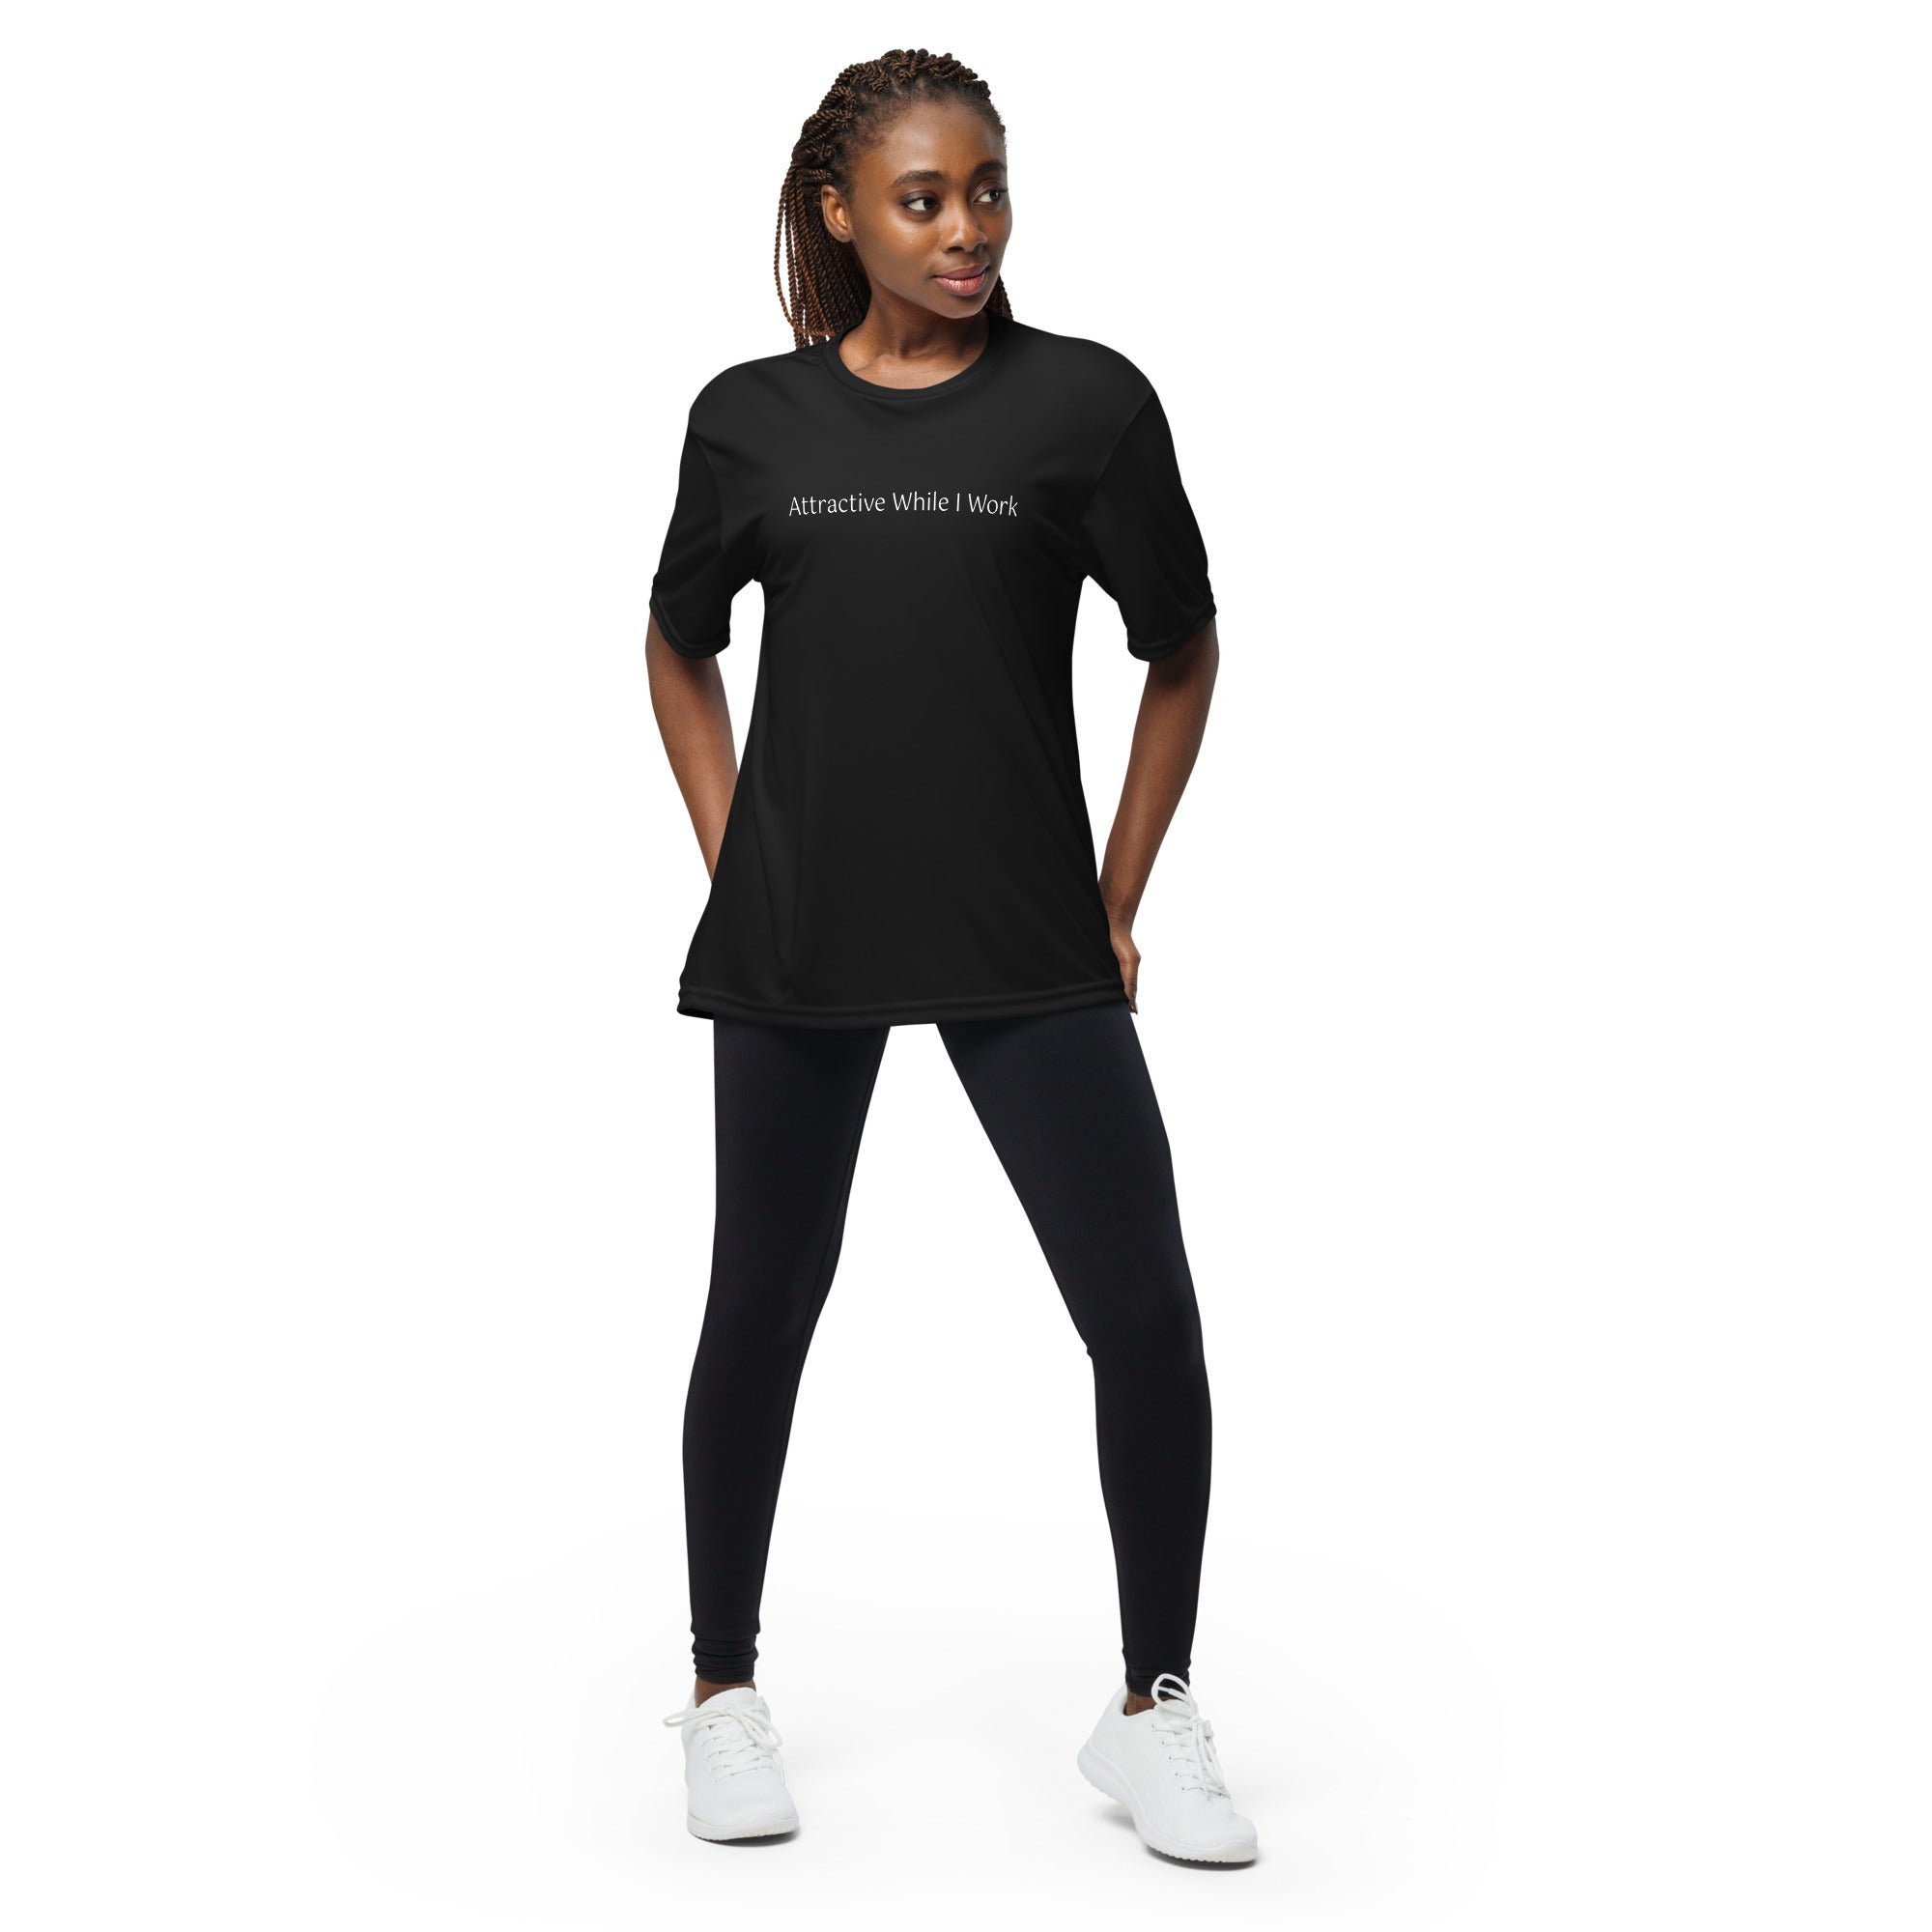 "Attractive While I Work" Unisex performance crew neck t-shirt